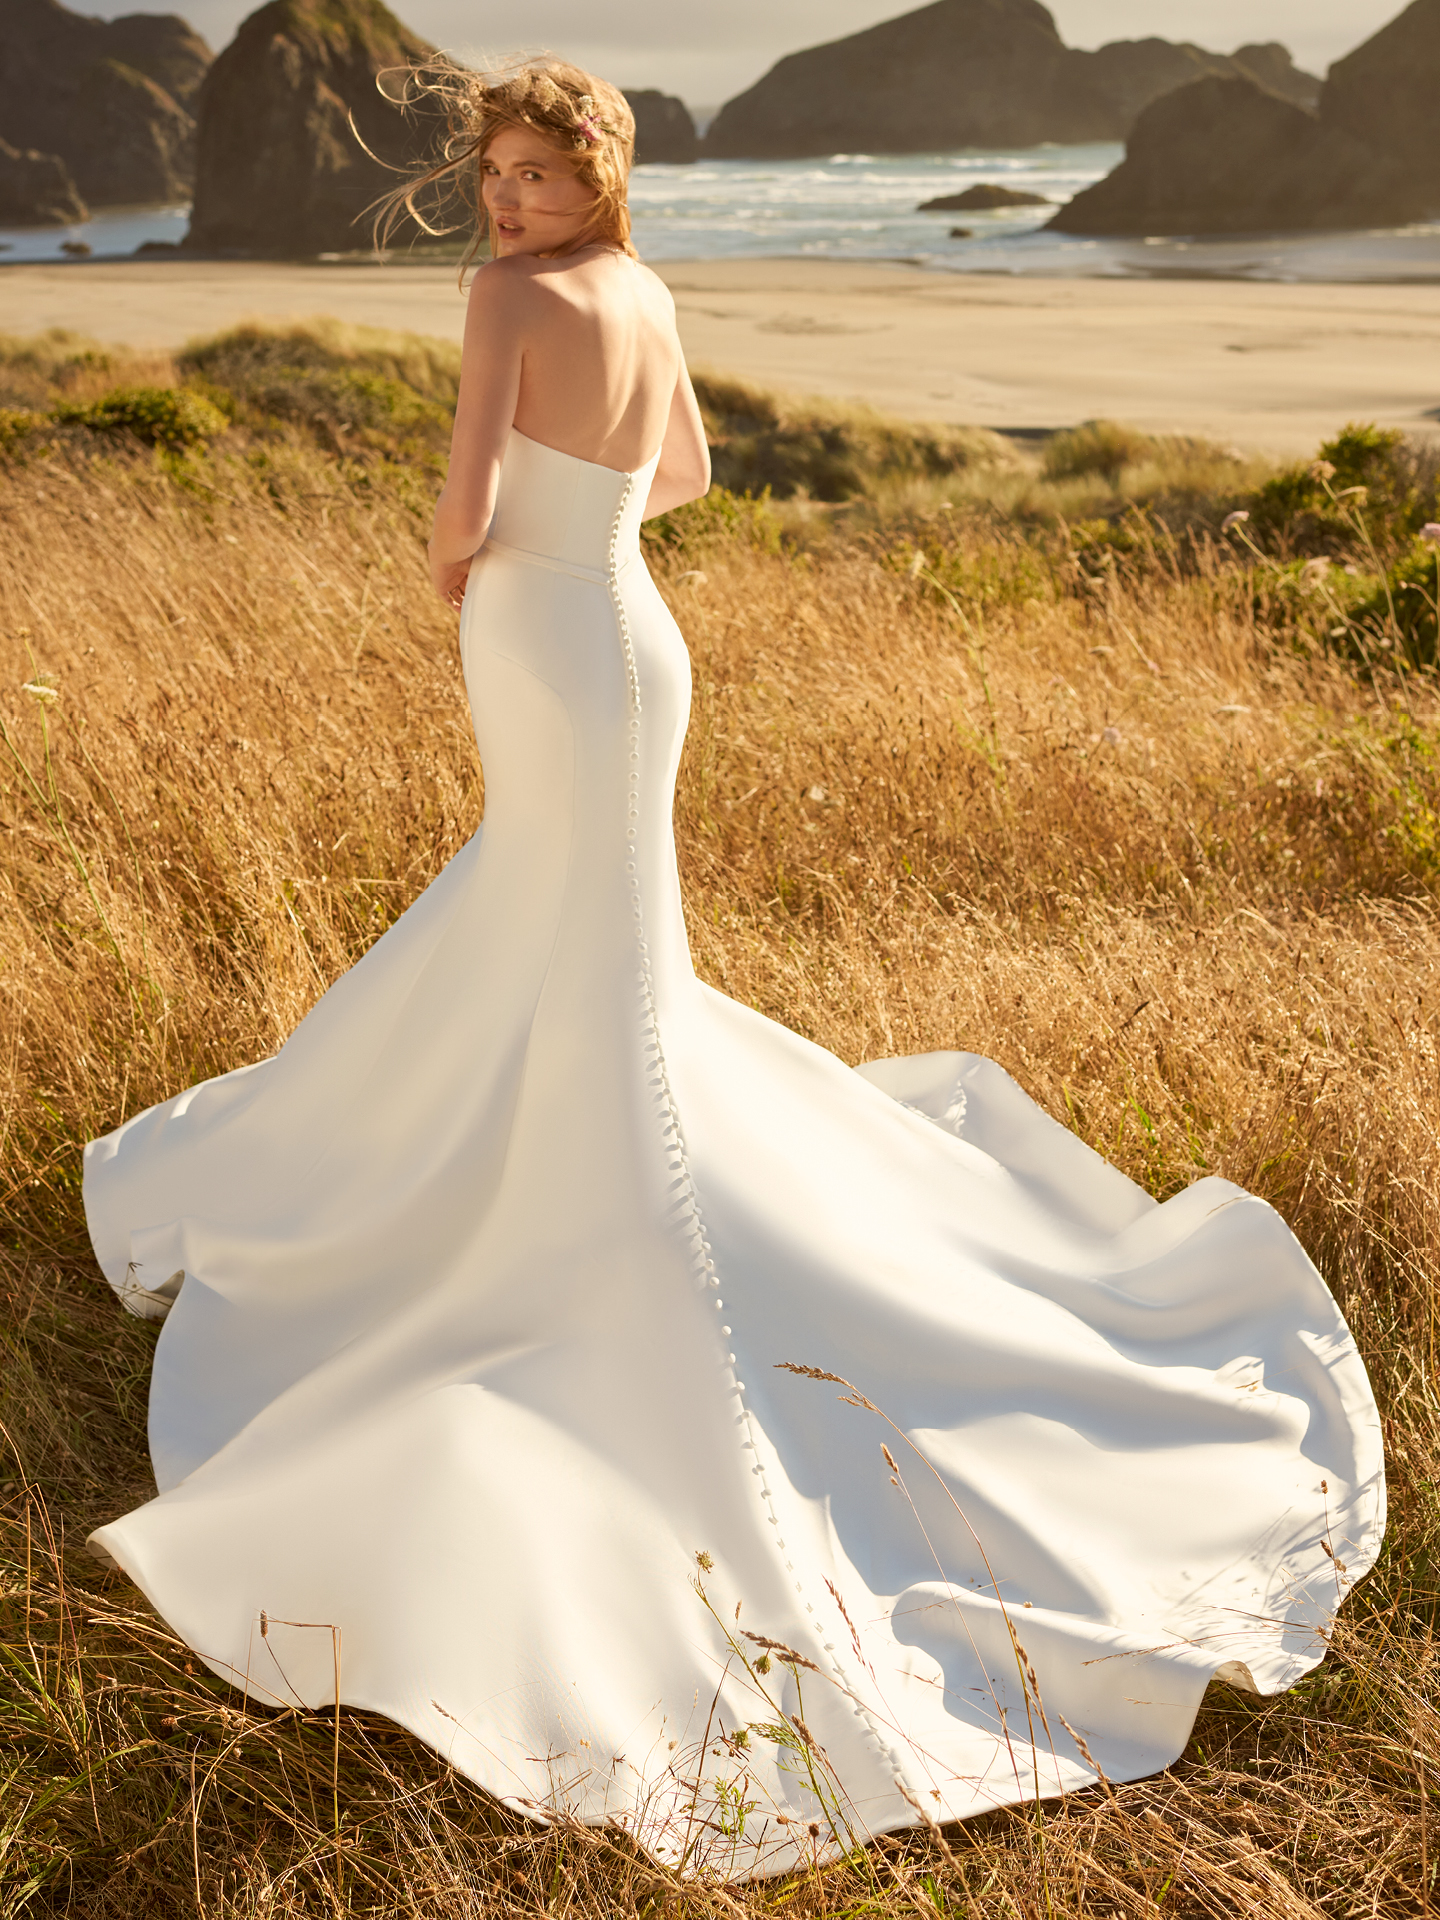 Bride Showing Off The Back Of Wedding Dress Called Pippa By Rebecca Ingram On Beach